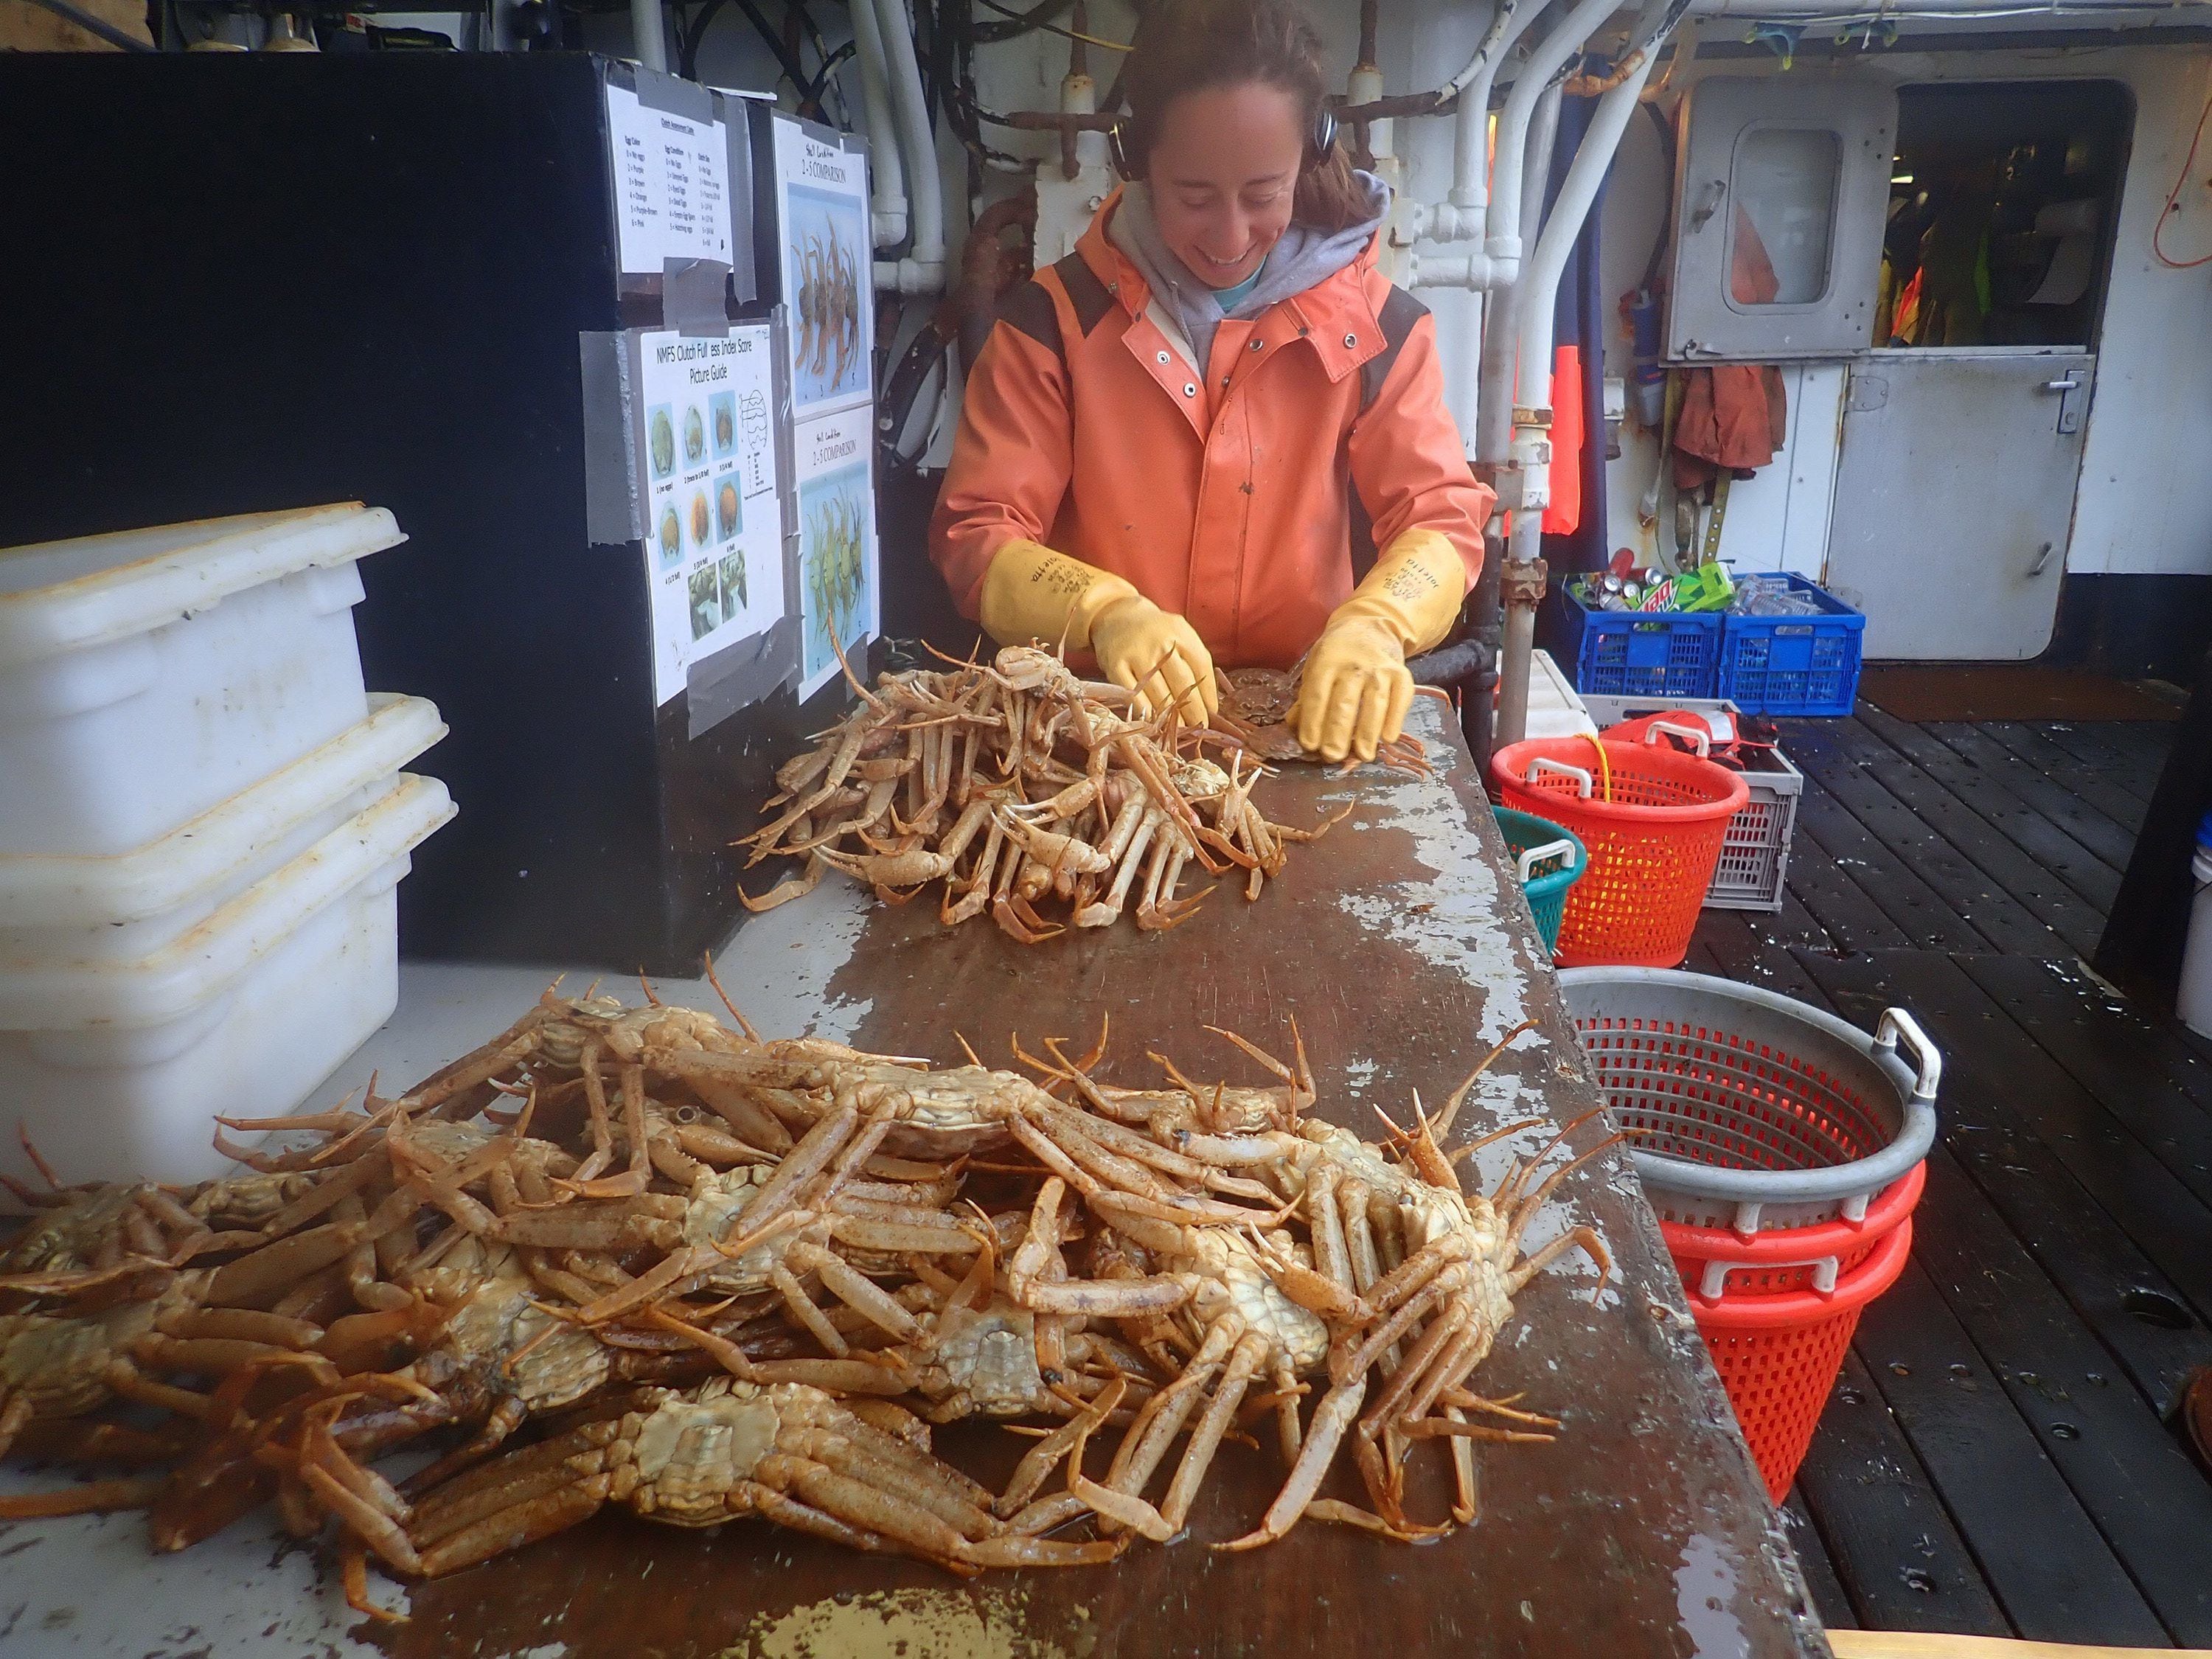 Alaska Cancels Snow Crab Fishing Season for First Time